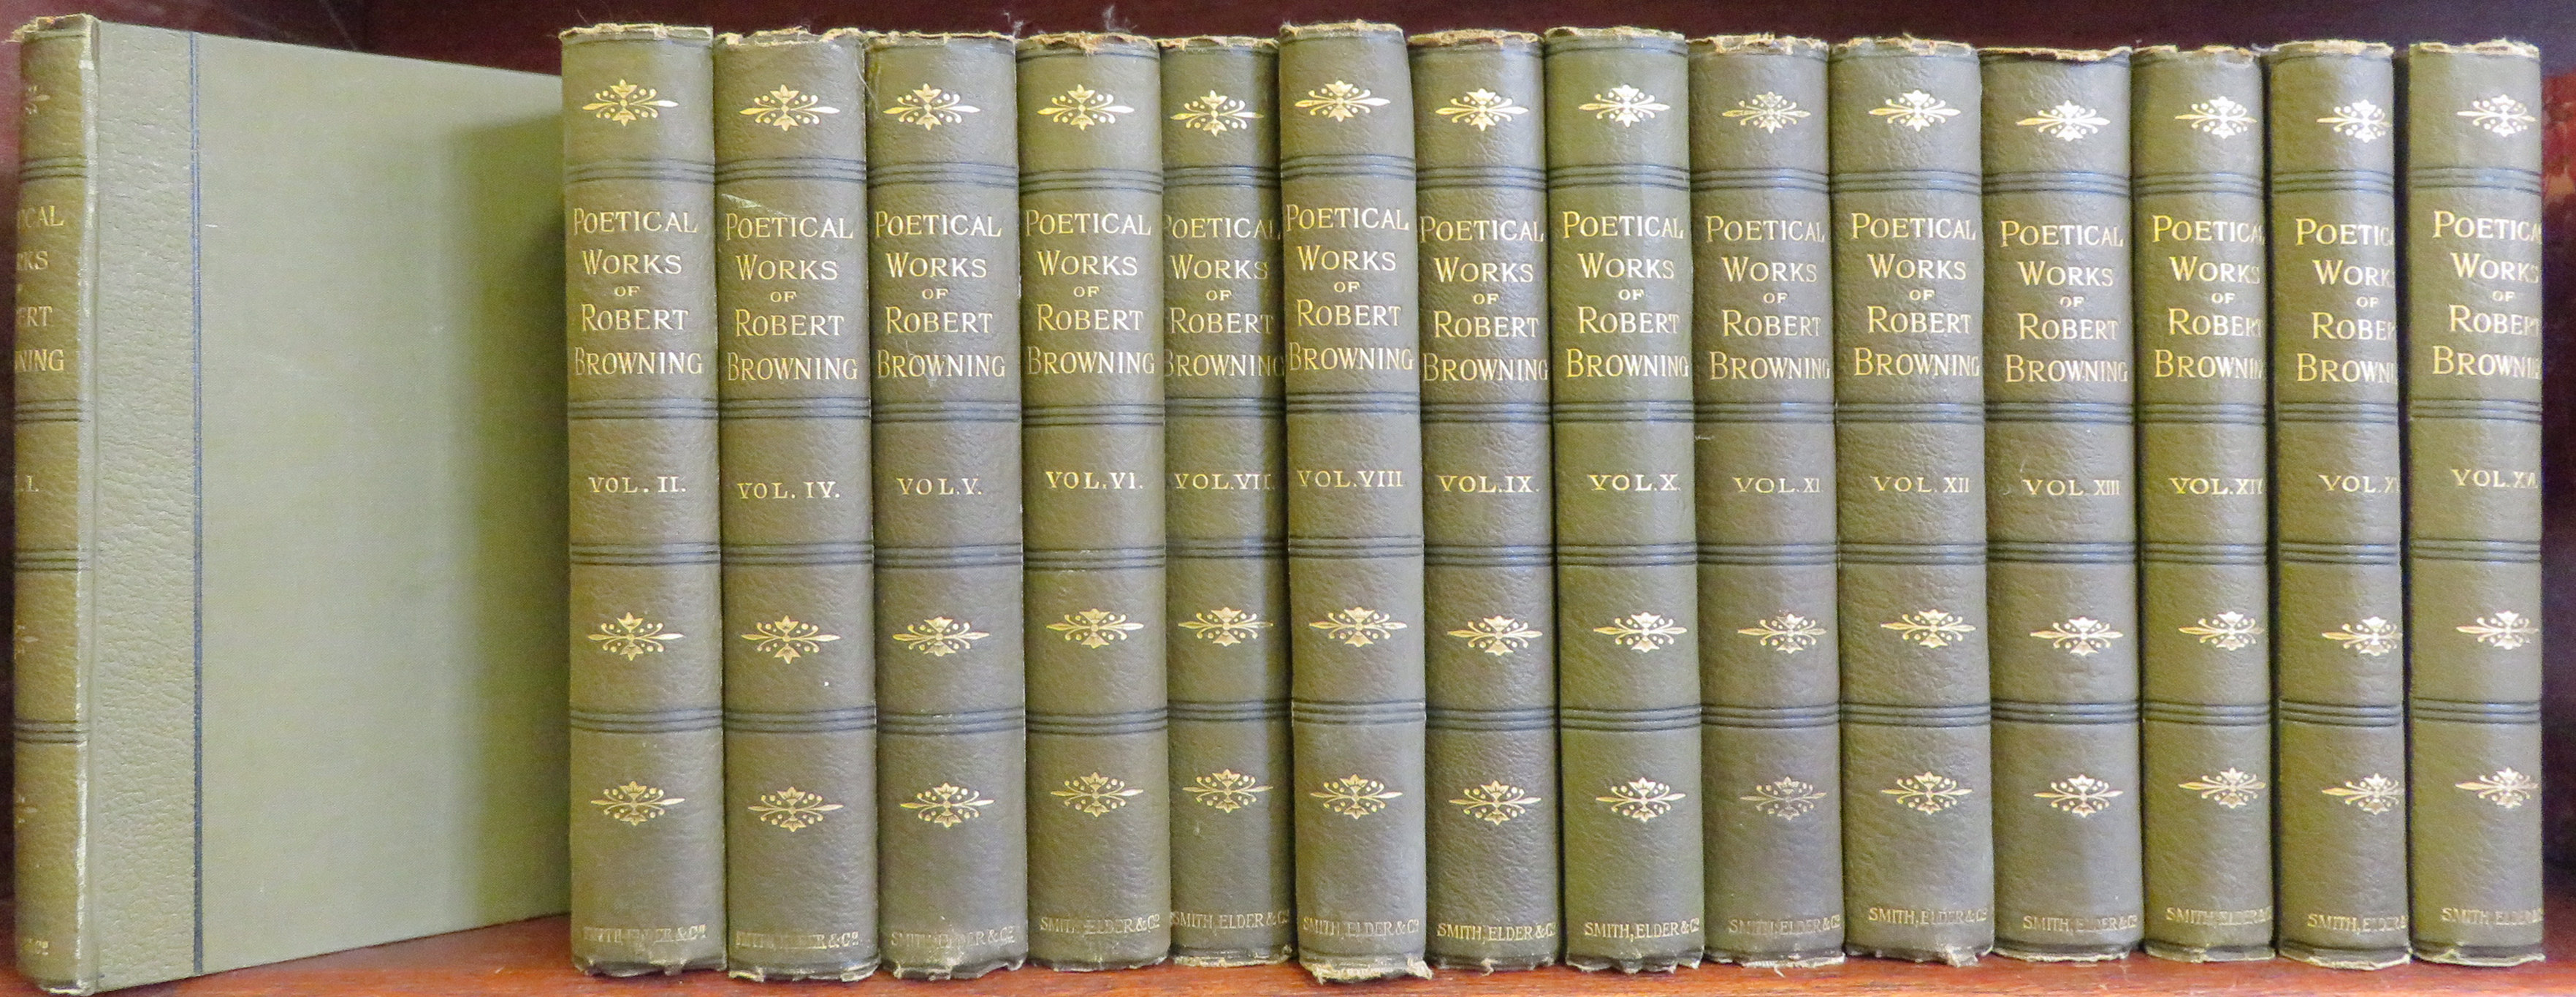 The Poetical Works of Robert Browning 15 volumes 